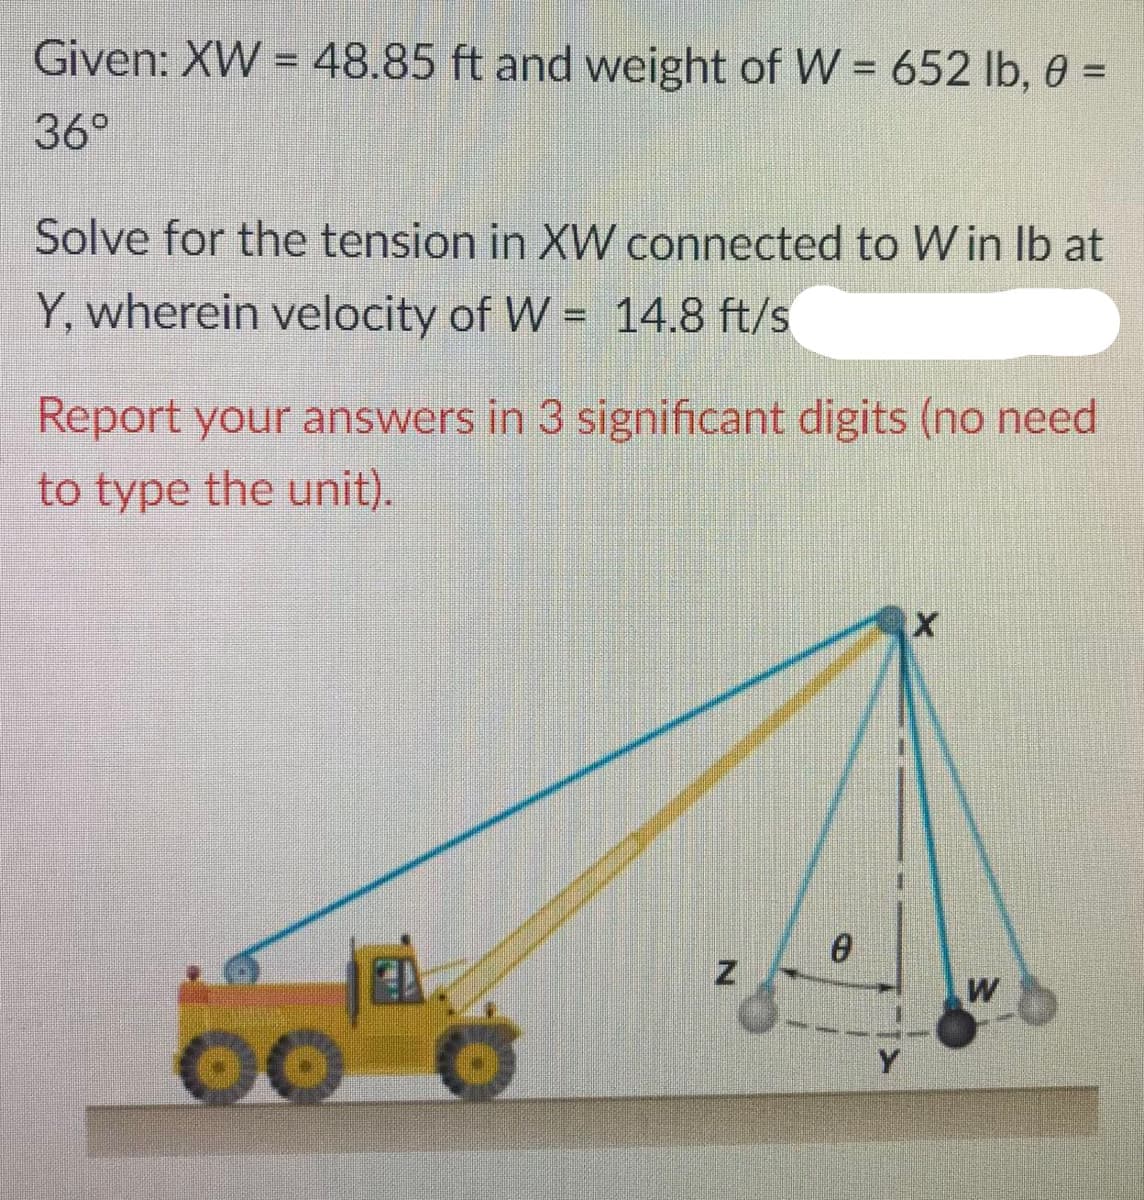 Given: XW = 48.85 ft and weight of W = 652 lb, 0 =
36°
Solve for the tension in XW connected to W in Ib at
Y, wherein velocity of W = 14.8 ft/s
Report your answers in 3 significant digits (no need
to type the unit).
